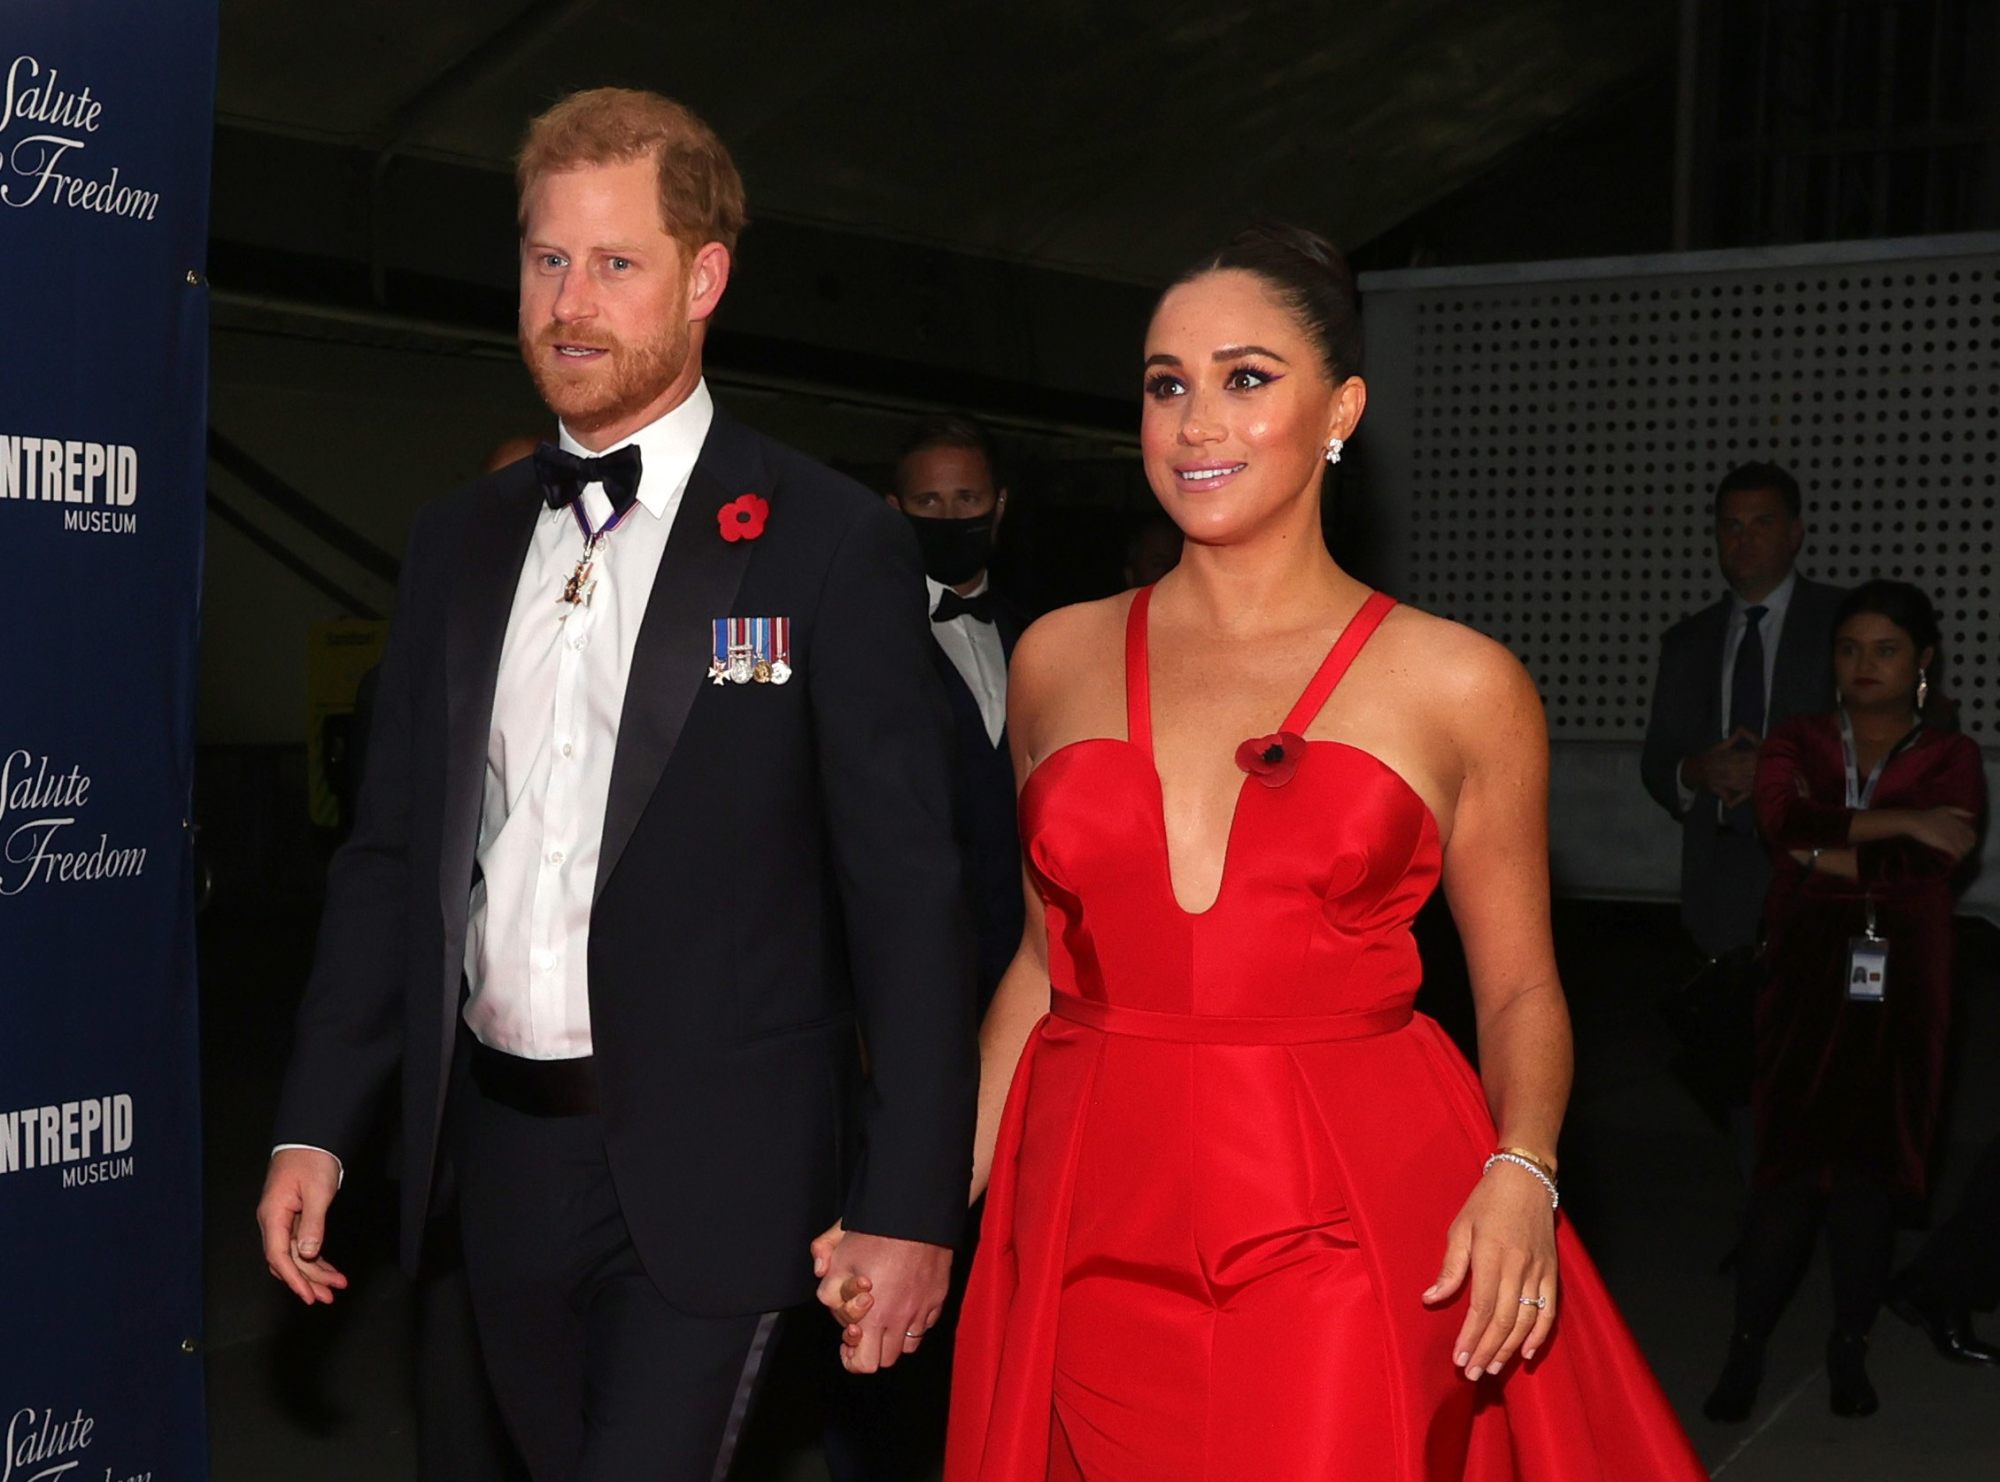 Prince Harry, Duke of Sussex and Meghan, Duchess of Sussex attend the 2021 Salute To Freedom Gala at Intrepid Sea-Air-Space Museum on November 10, 2021 in New York City. Photo: AFP